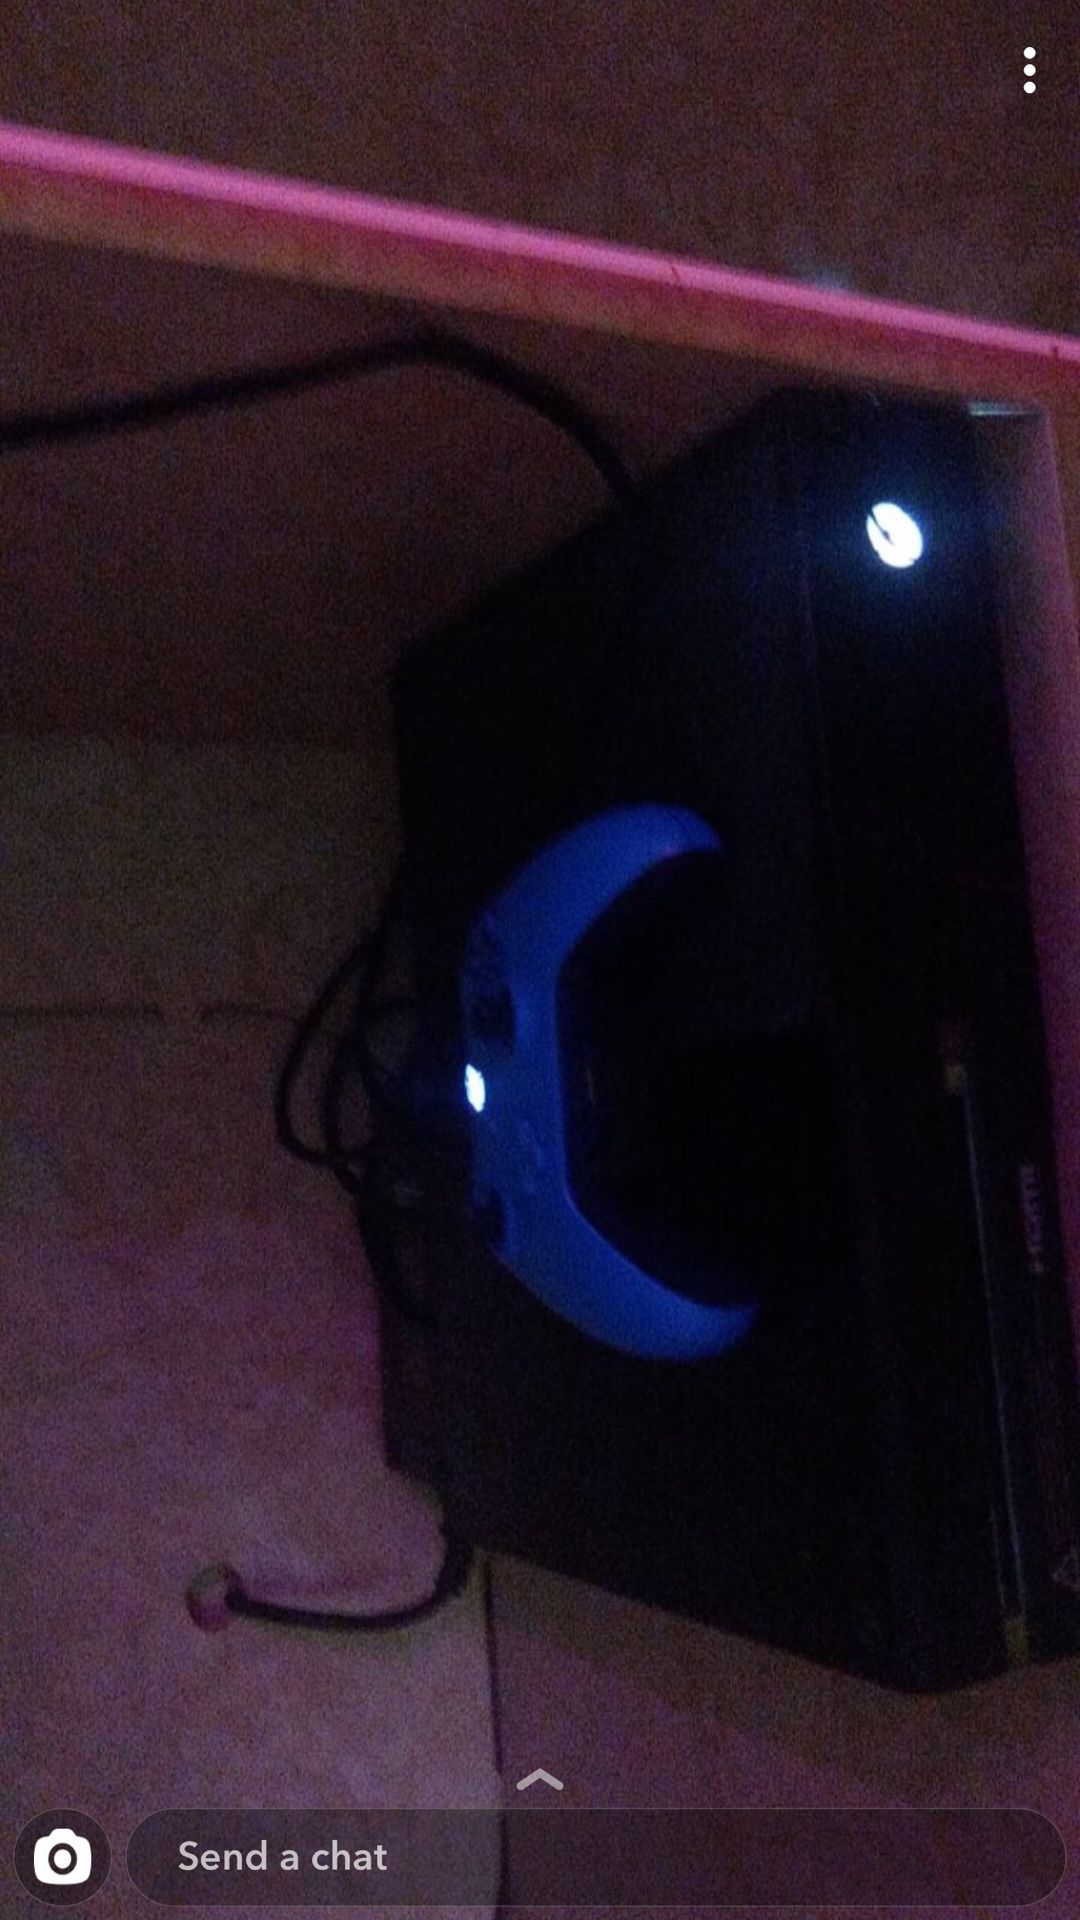 Xbox One With Games(digital) and Blue Controller